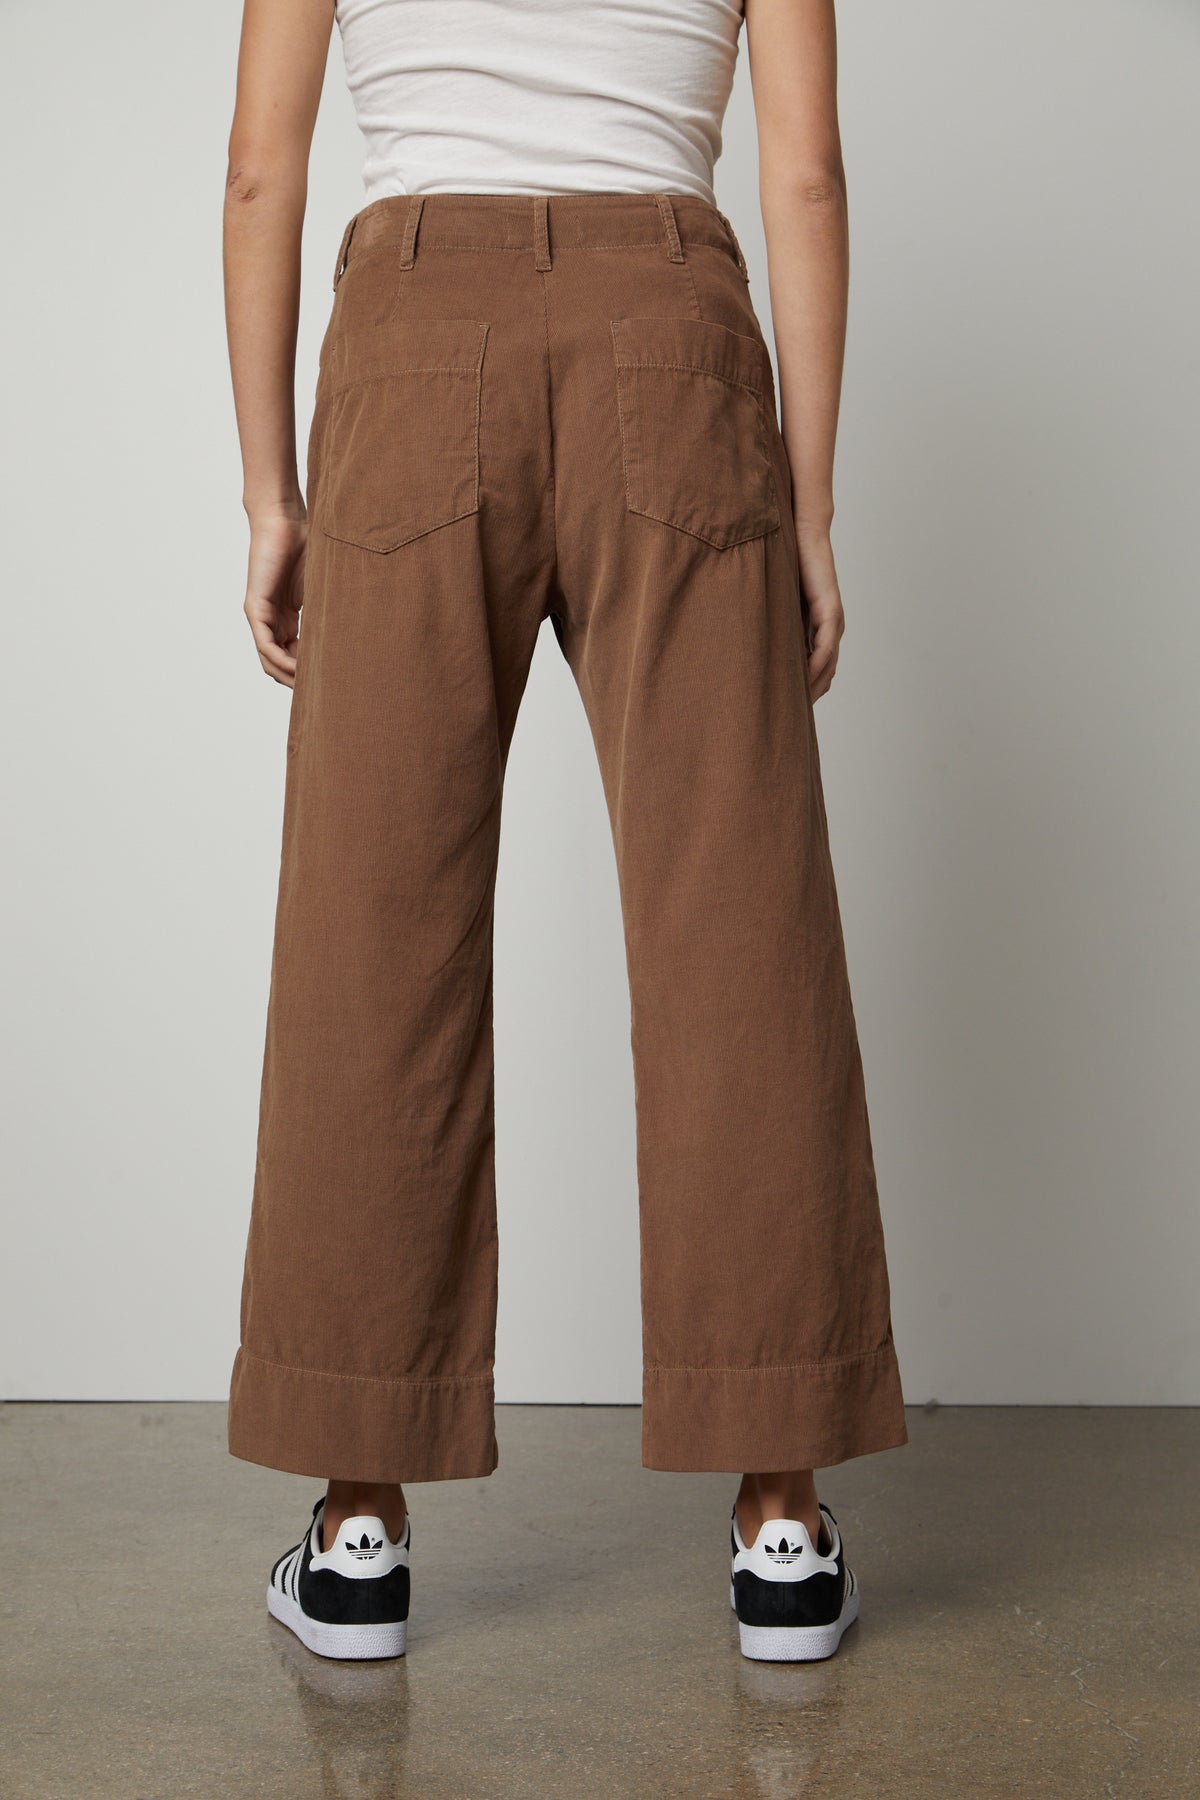 The back view of a woman wearing Velvet by Graham & Spencer's VERA CORDUROY WIDE LEG PANT with utility details.-26914938650817